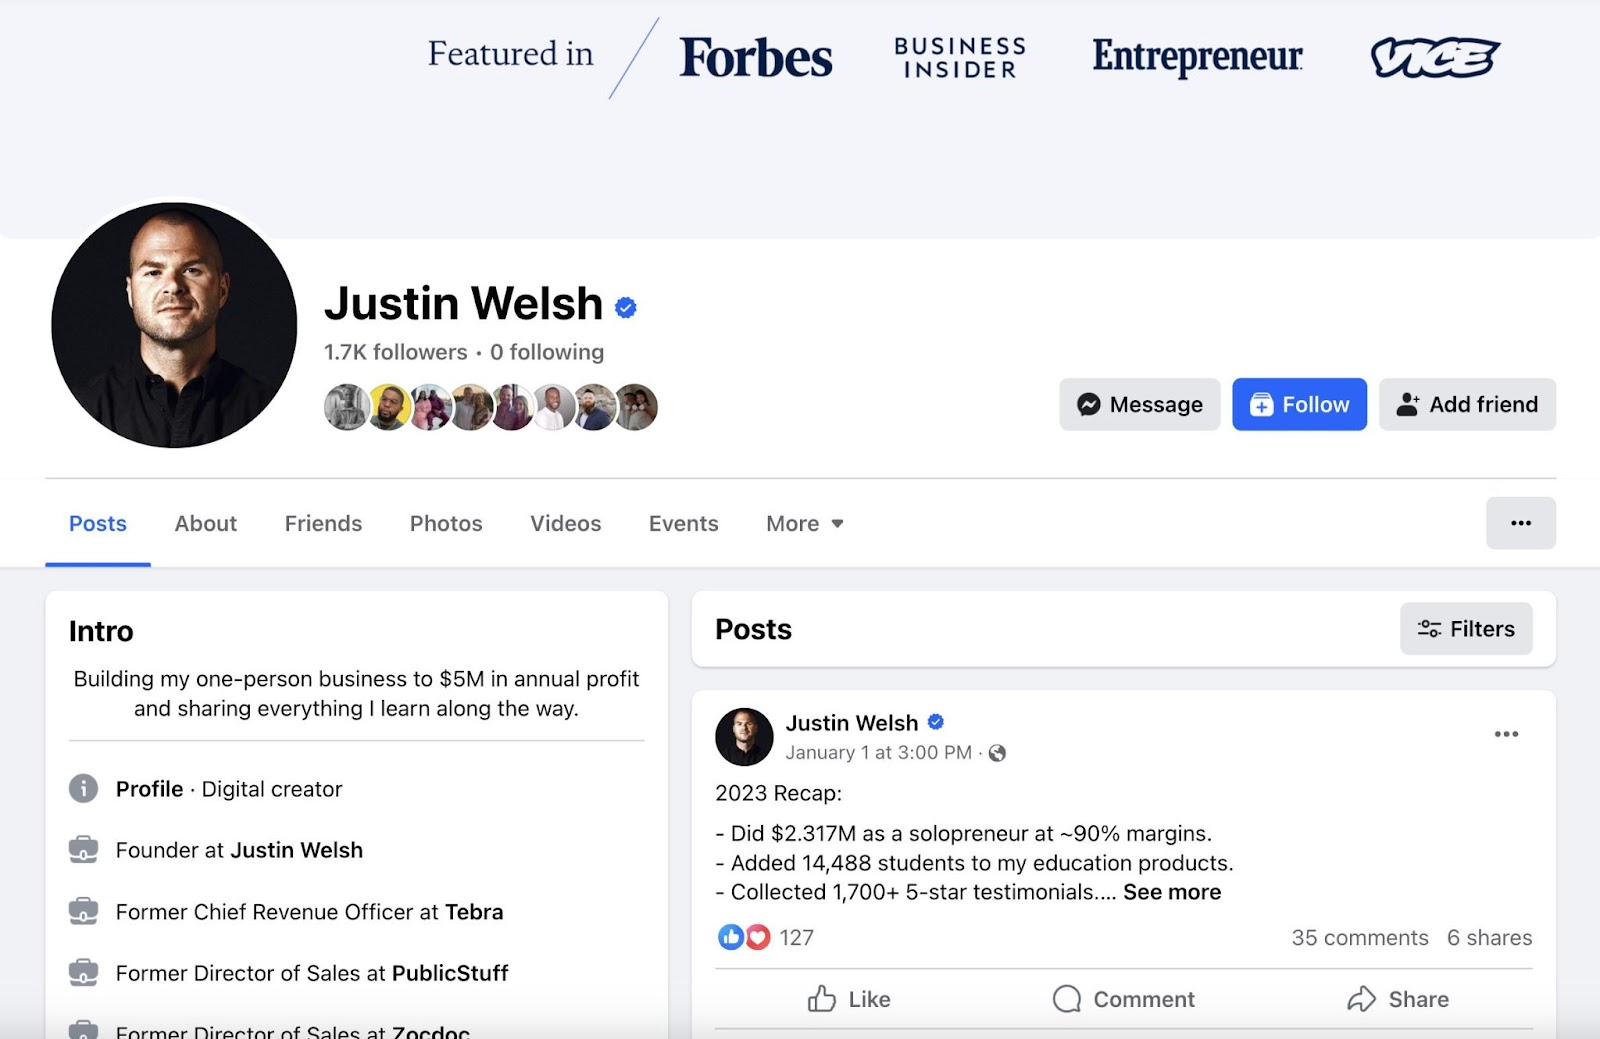 Justin Welsh’s Facebook page overview